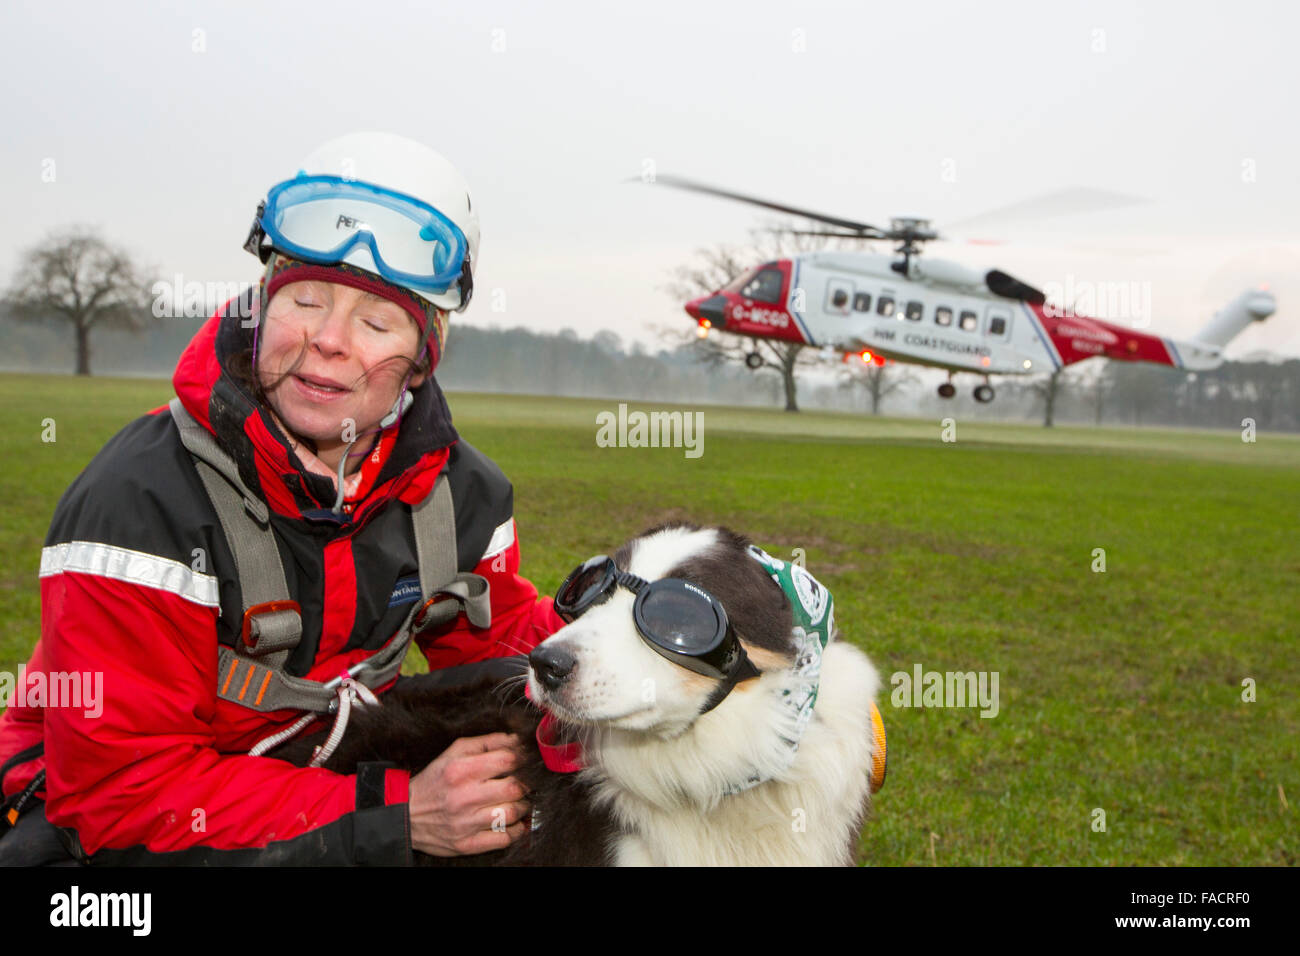 A Sikorsky S92 Helicopters run operated by Bristows at Carlton Hall in Penrith, Cumbria, UK to train with Lake district mountain rescue Team members, with a SARDA, Search and Rescue dog Association, search dog, wearing eye and ear protection. Stock Photo